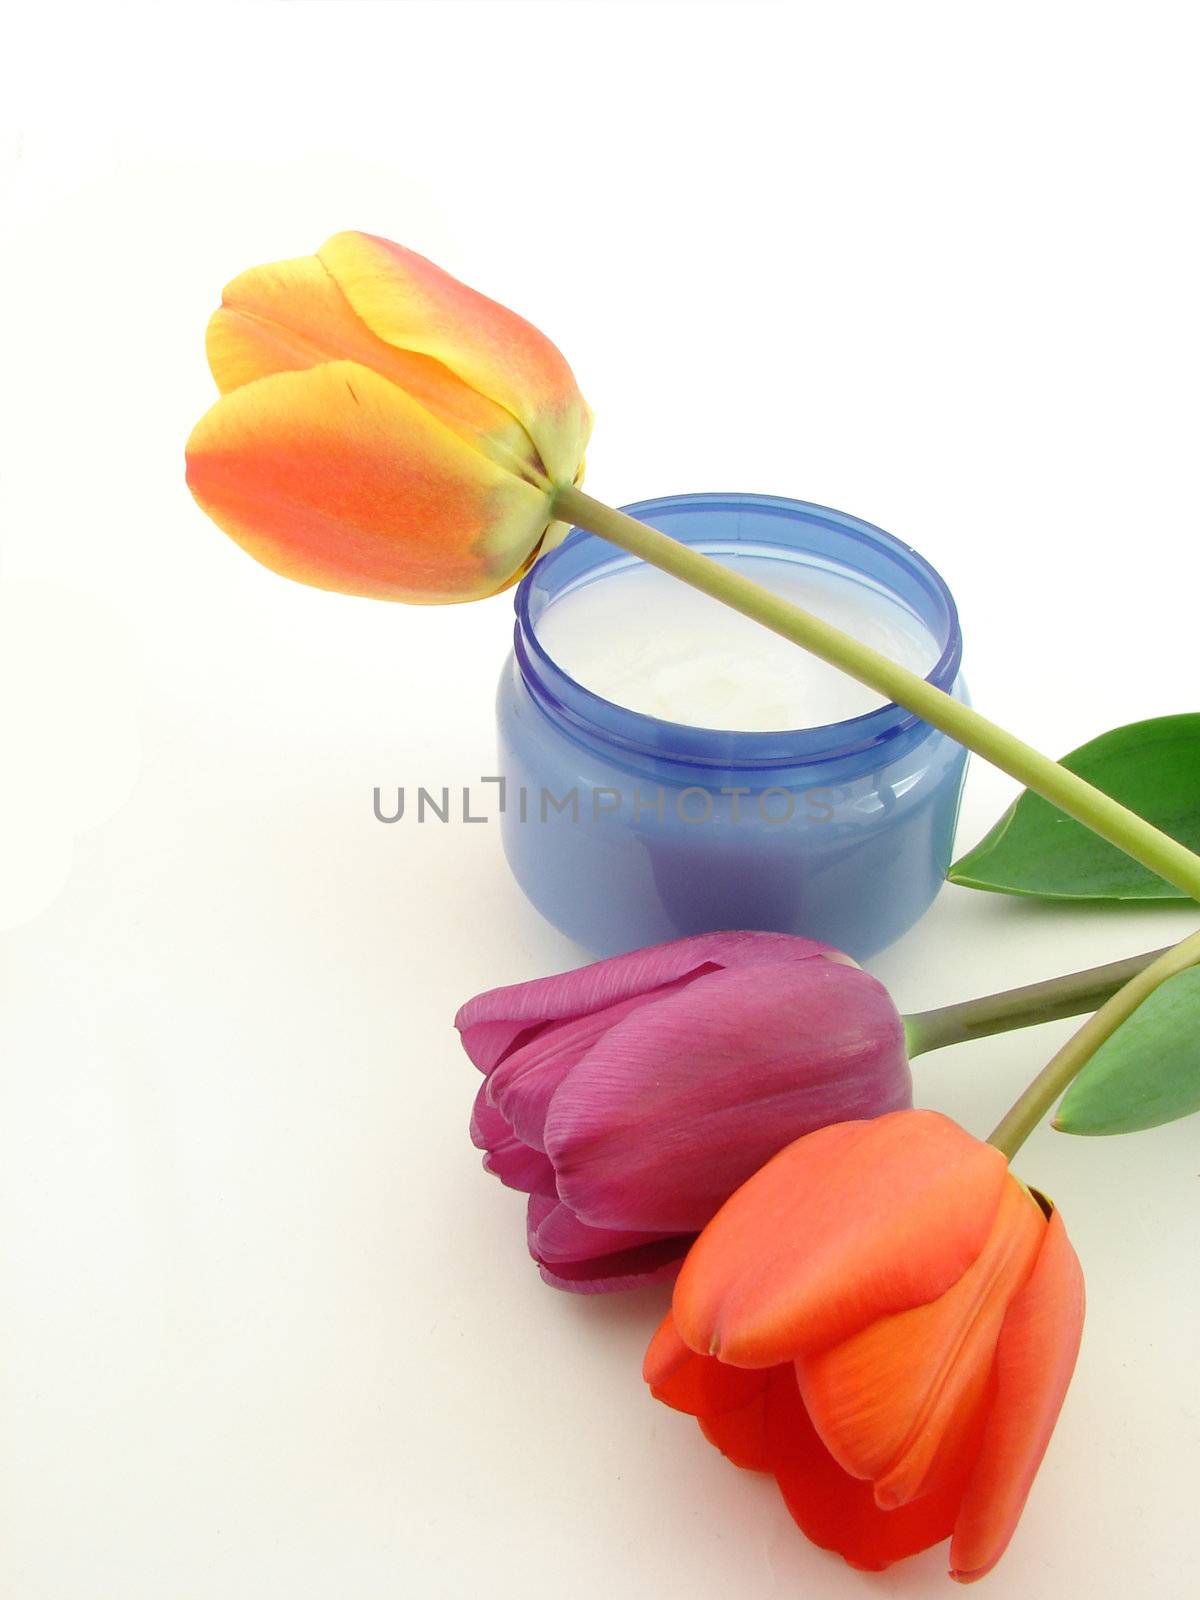 Tulip flowers and cream isolated over white, concept of beauty and bodycare.